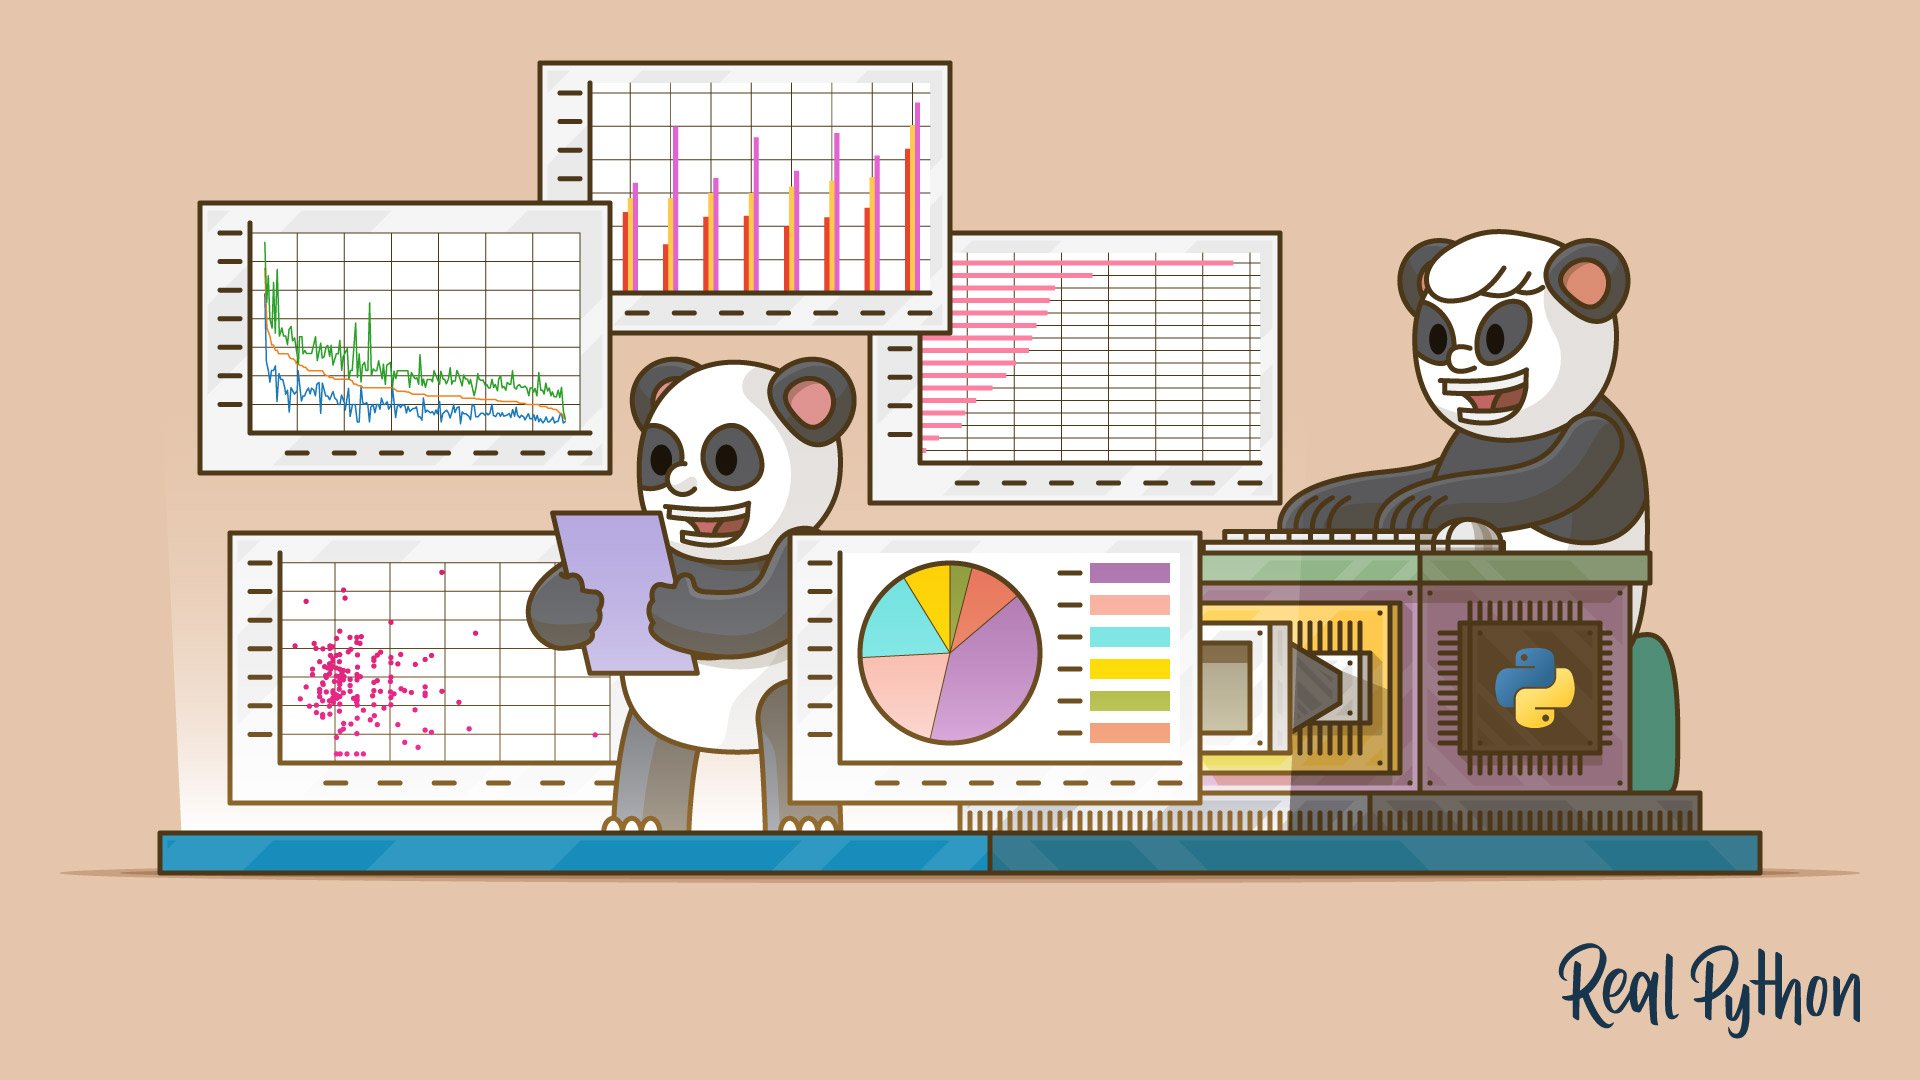 Plot With Pandas: Python Data Visualization for Beginners